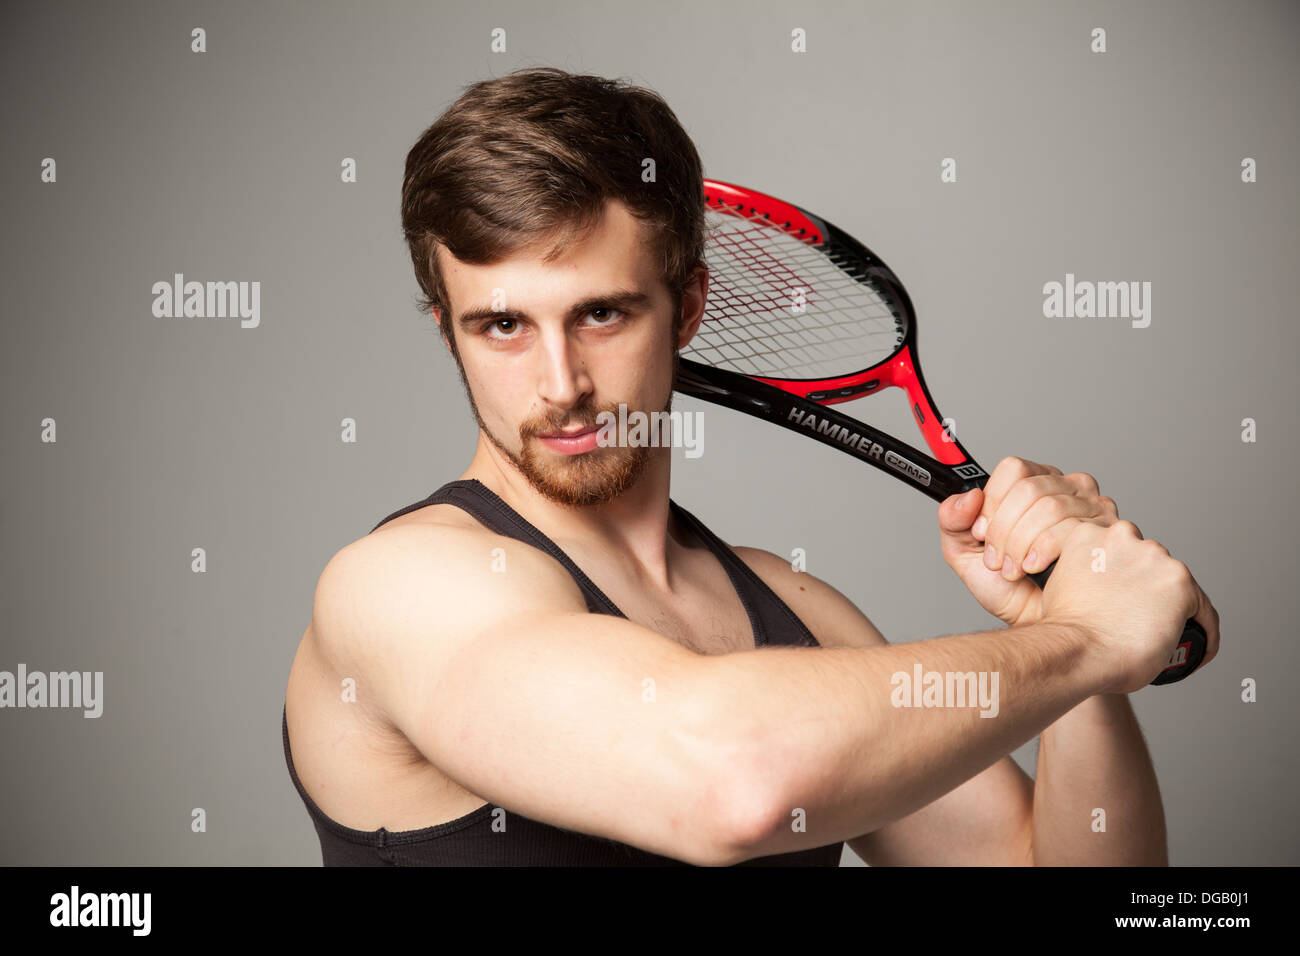 Fit male tennis player model Stock Photo - Alamy